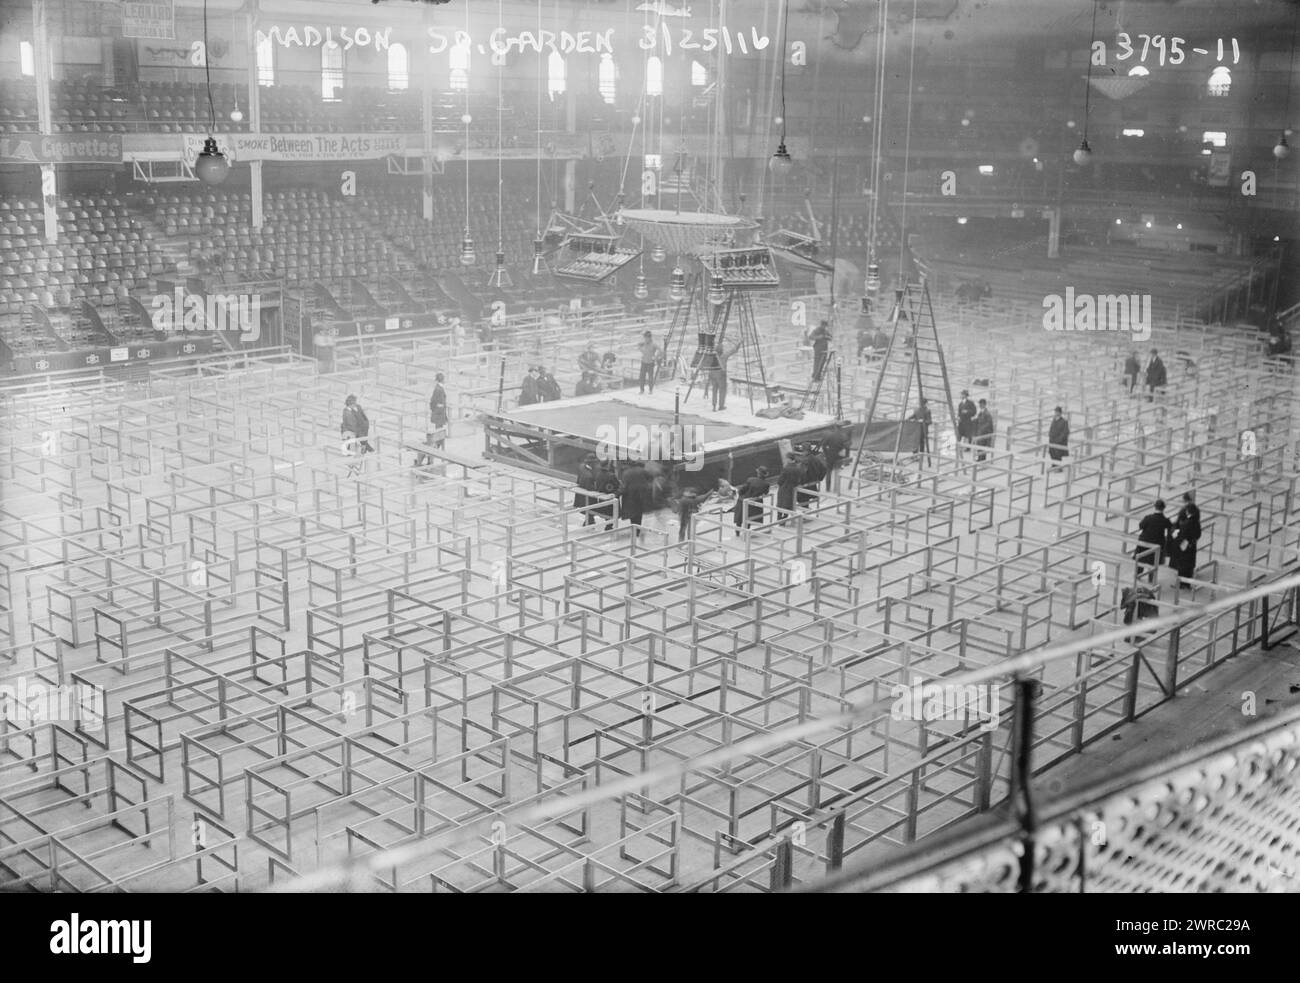 Madison Sq. Garden, 3/25/16, Photograph shows crews preparing the ring for the boxing match between Frank Moran and Jess Willard, March 25, 1916 at Madison Square Garden in New York City., 3/25/16, Glass negatives, 1 negative: glass Stock Photo